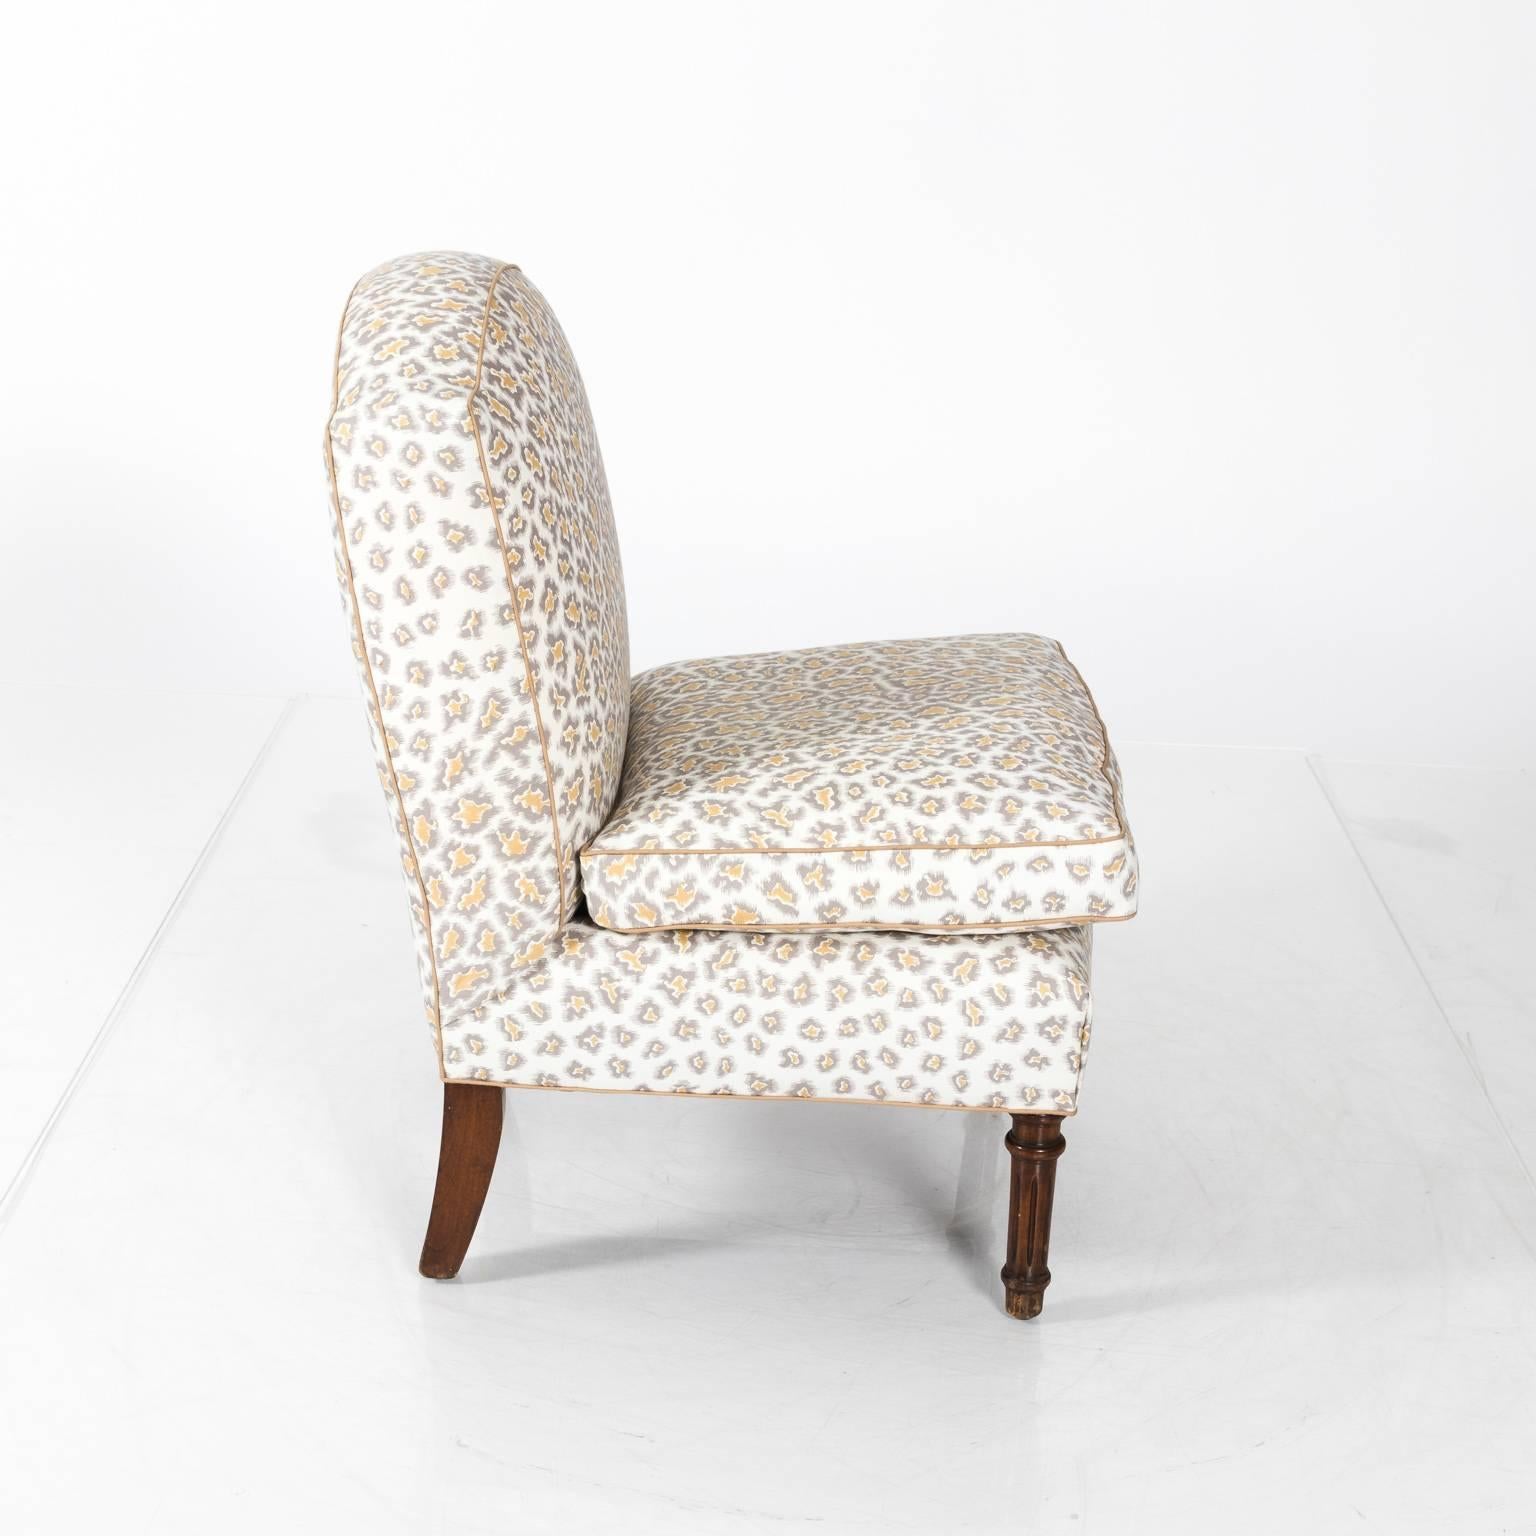 20th Century Small Upholstered Slipper Chair